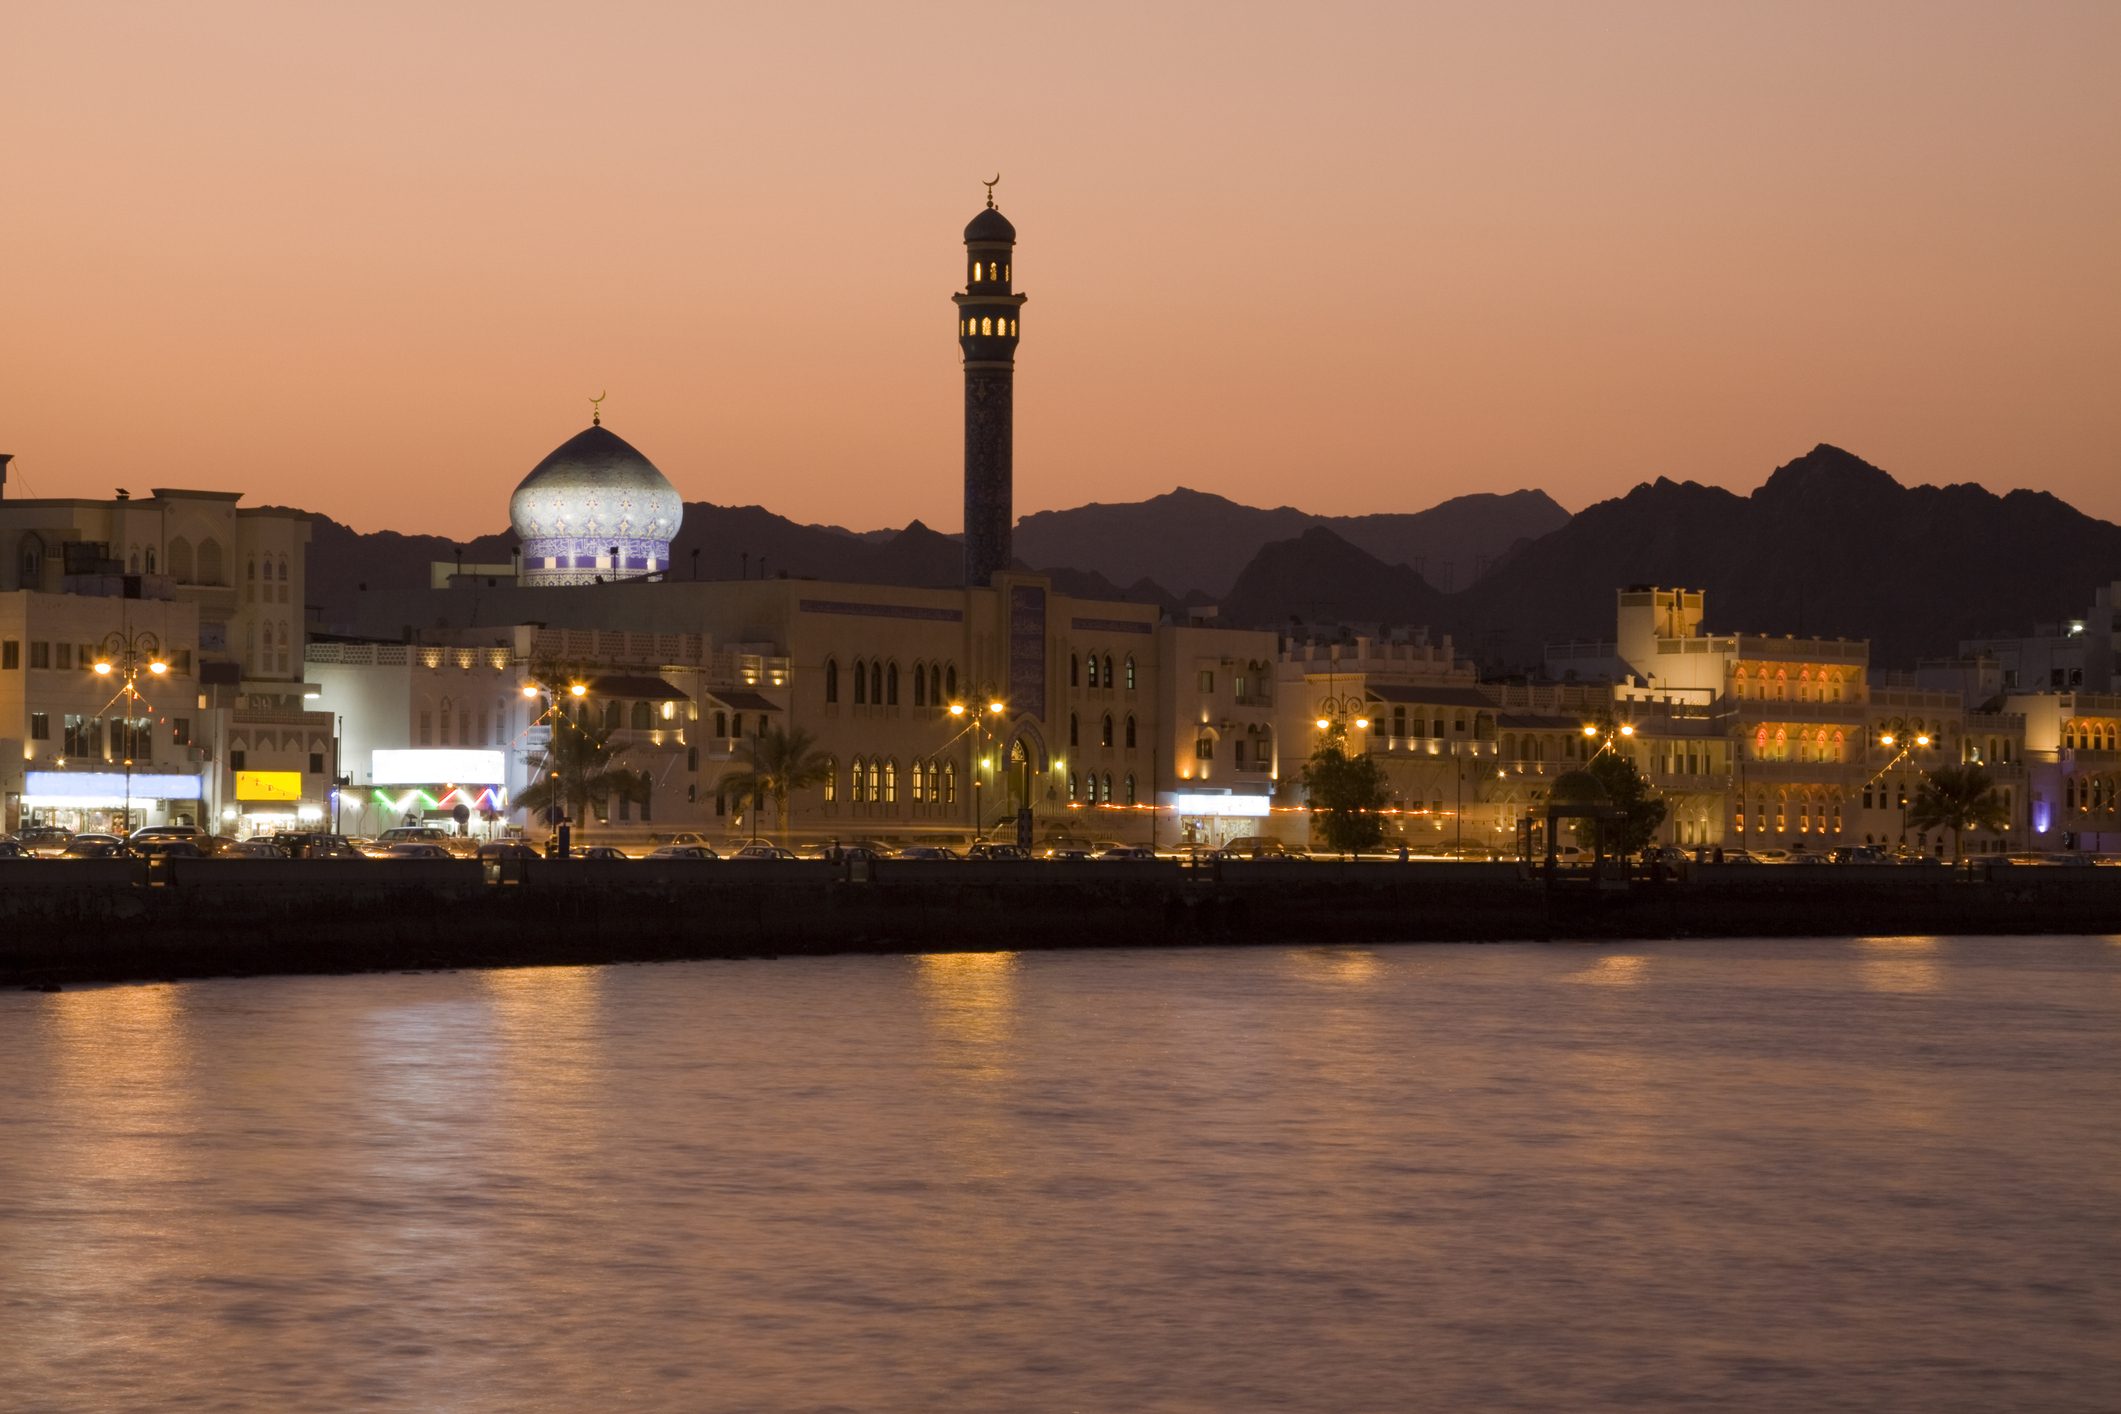 Sunset in Muscat, Oman.